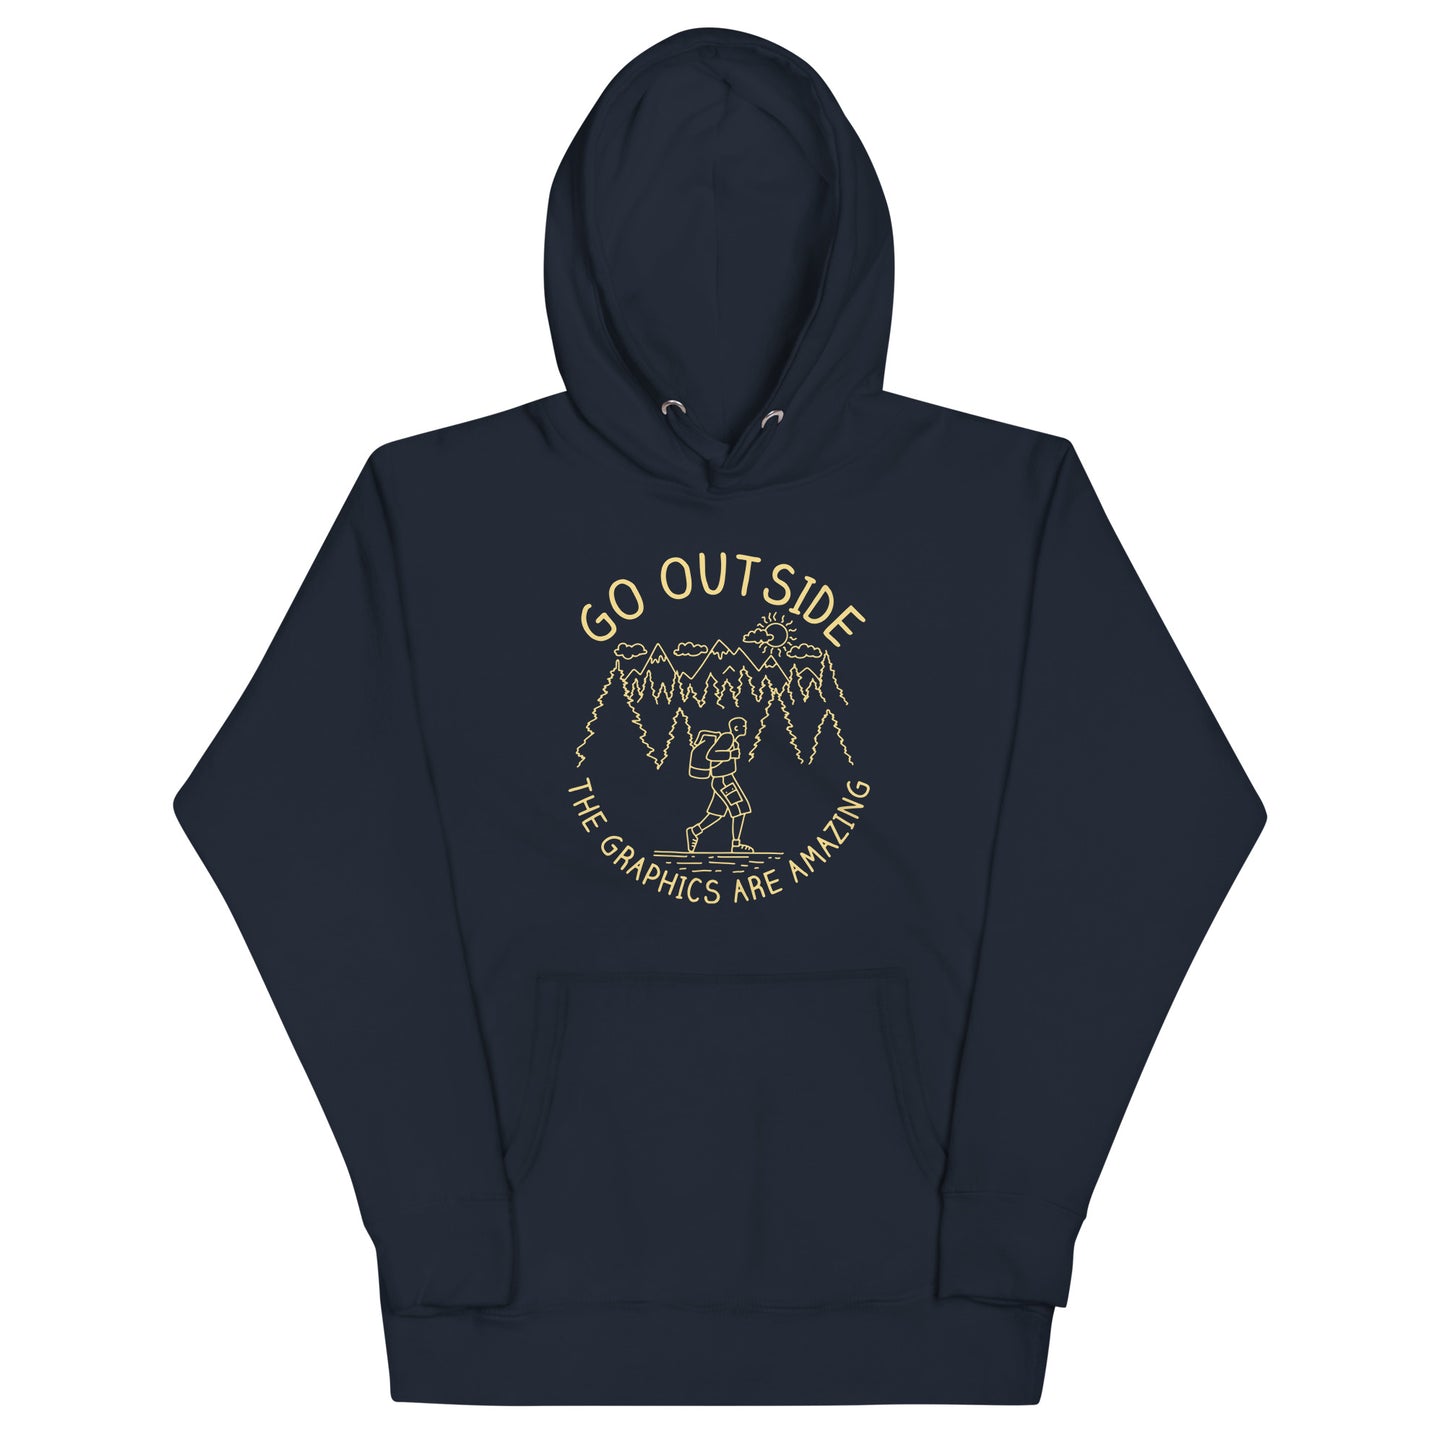 Go Outside The Graphics Are Amazing Unisex Hoodie